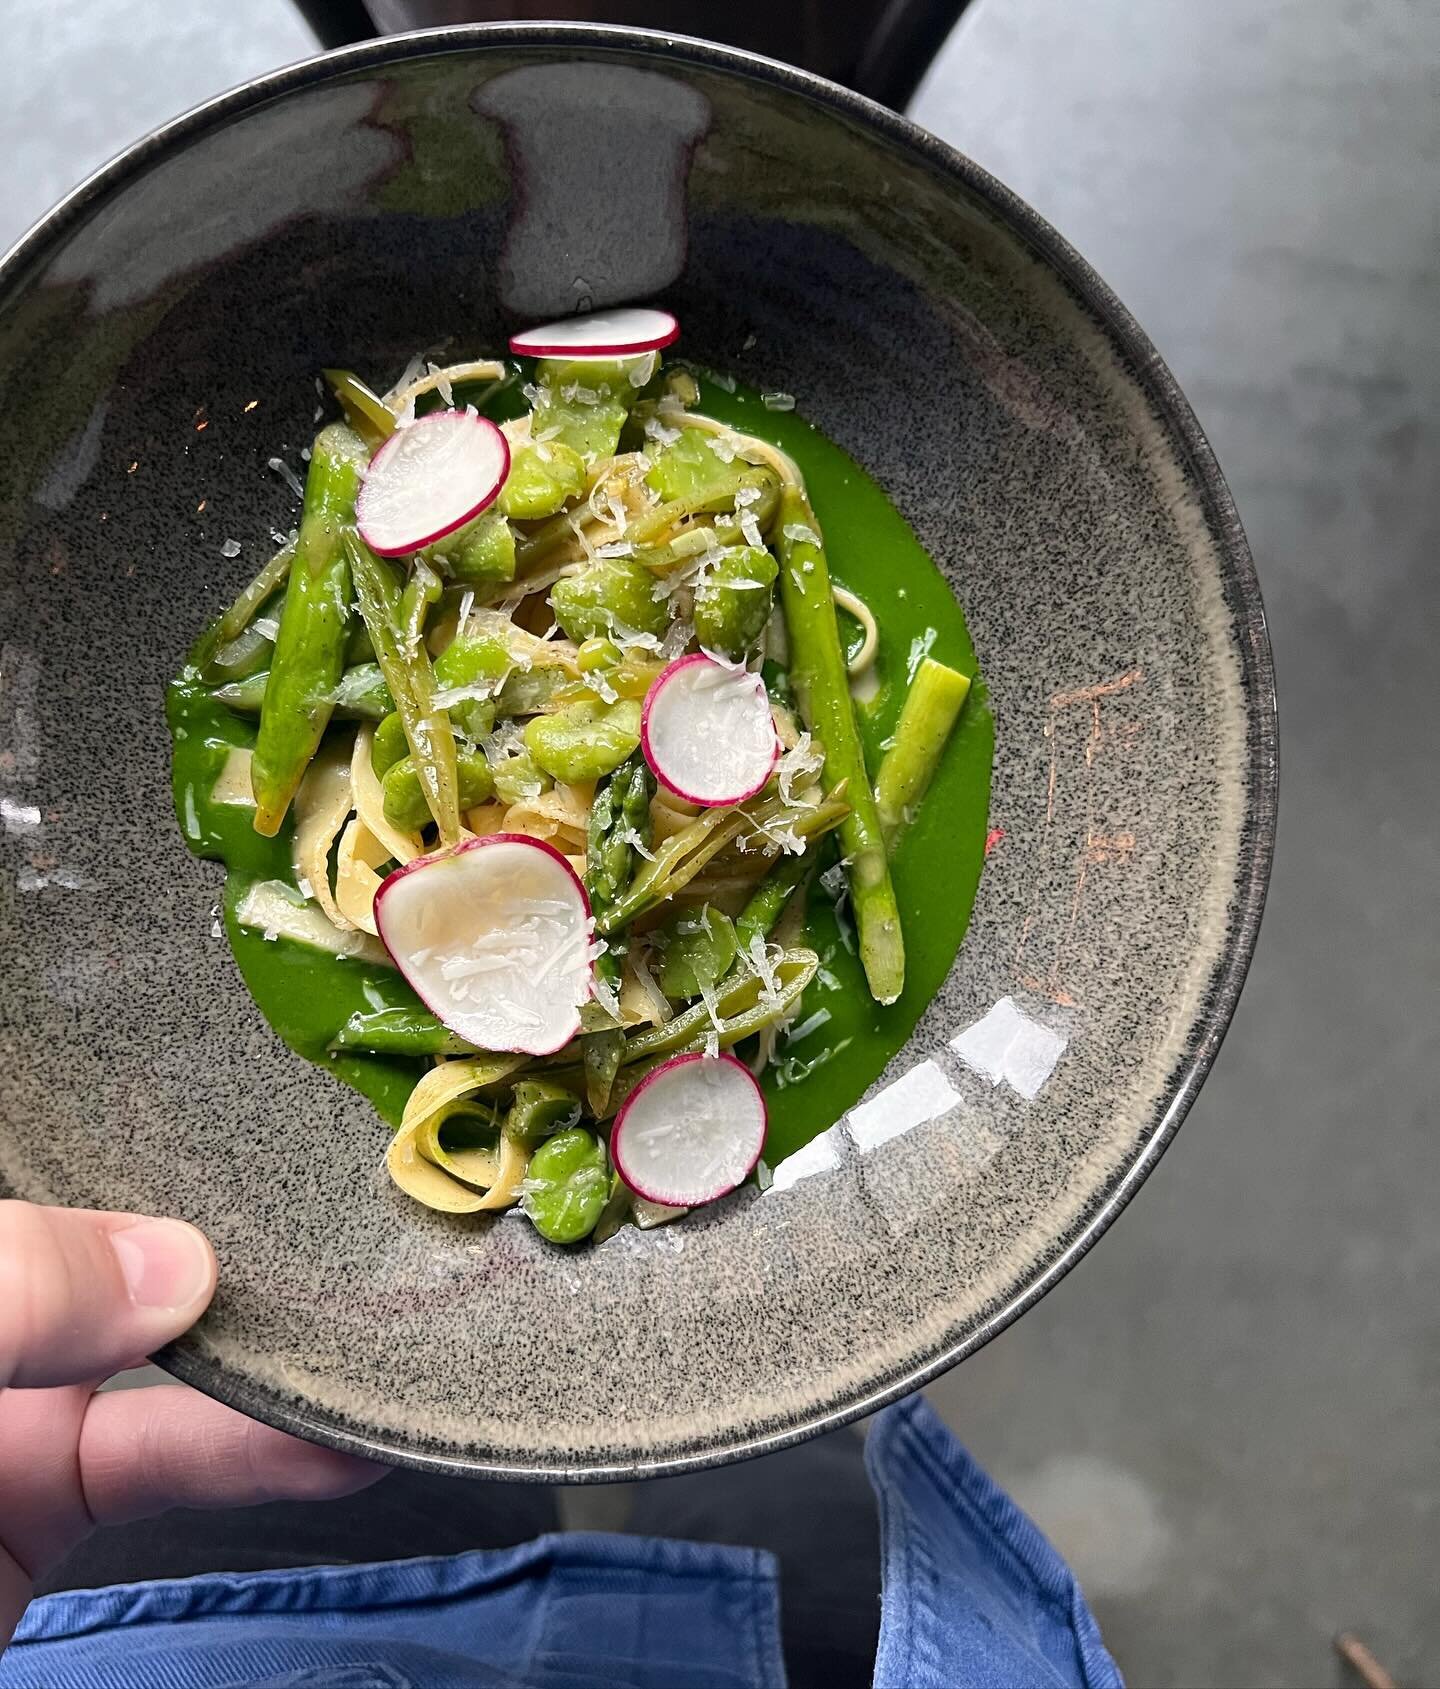 Housemade Tagliolini Pasta with a shitload of Spring vibz coming atcha from Chef @plantainsupernova_ 

Snap peas, asparagus, favas &amp; radishes... if we manifest spring maybe we'll actually see the sun ☀️ 

#bostonfoodscene #springhasntsprung #butw